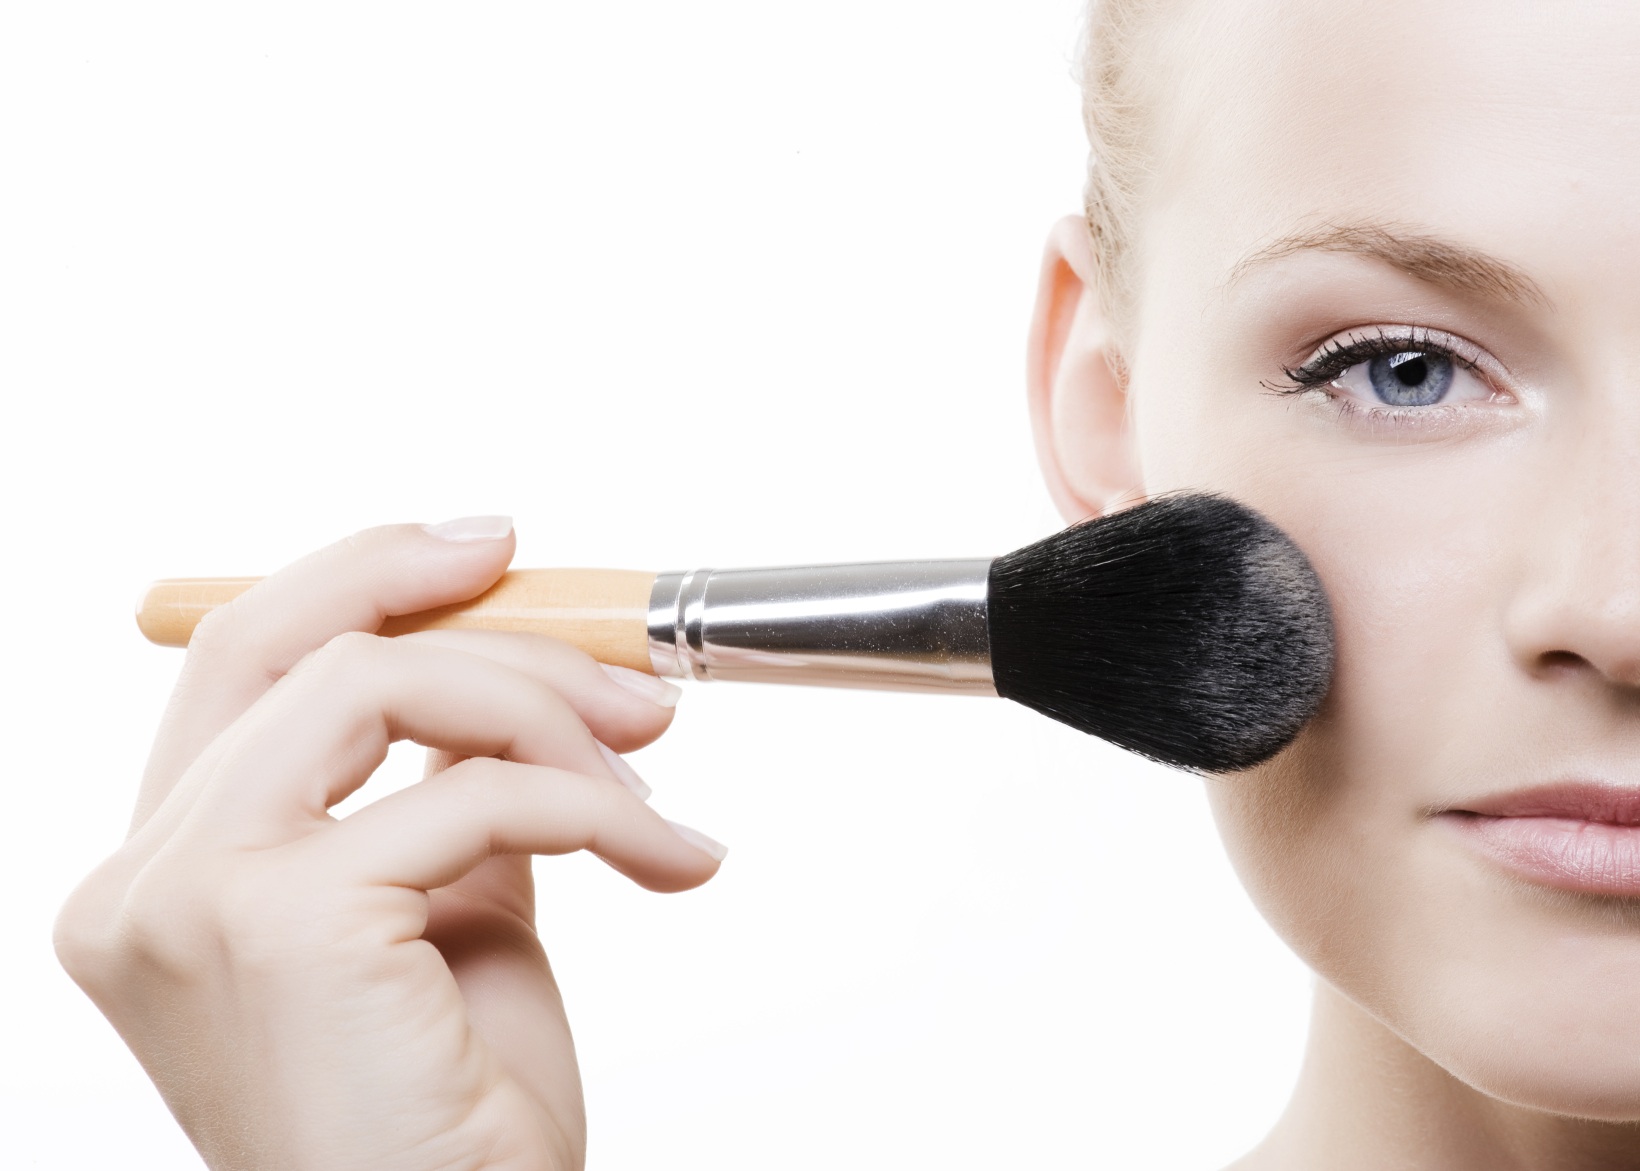 Acne Makeup - AcneSkinExpert's Guide to buying makeup that won't cause breakouts